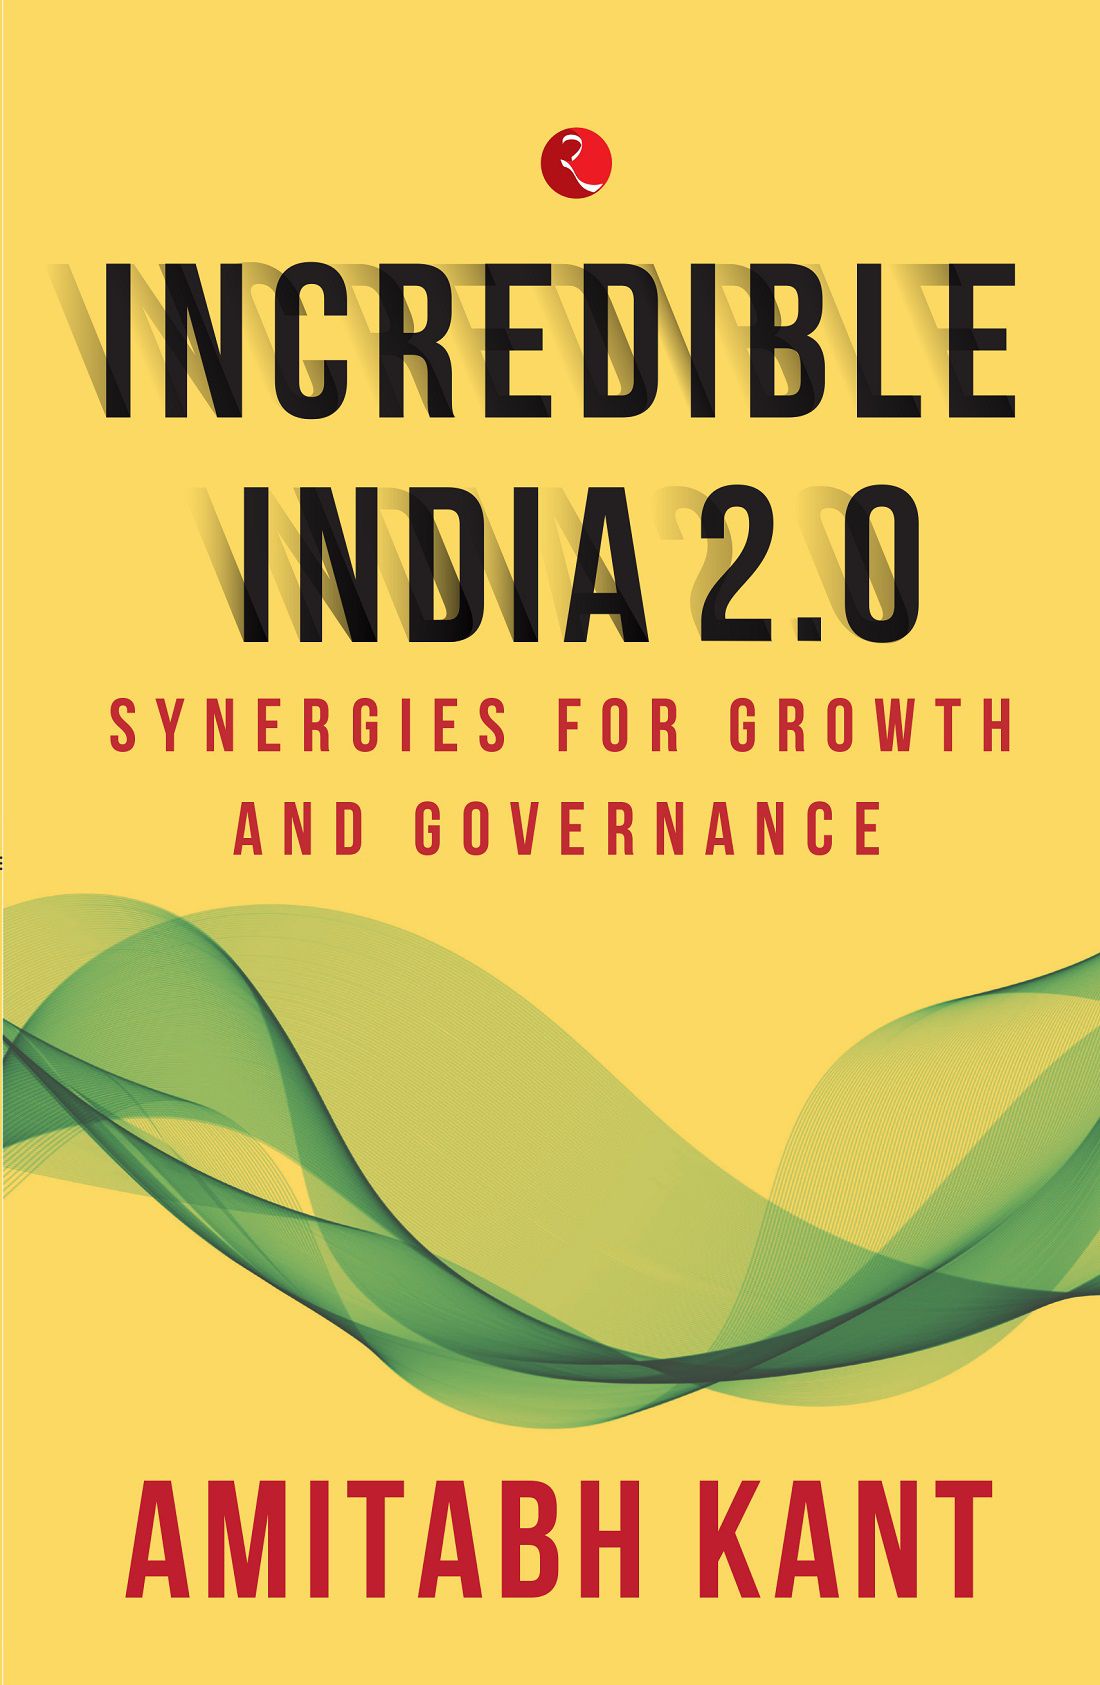     			INCREDIBLE INDIA 2.0: Synergies for Growth and Governance